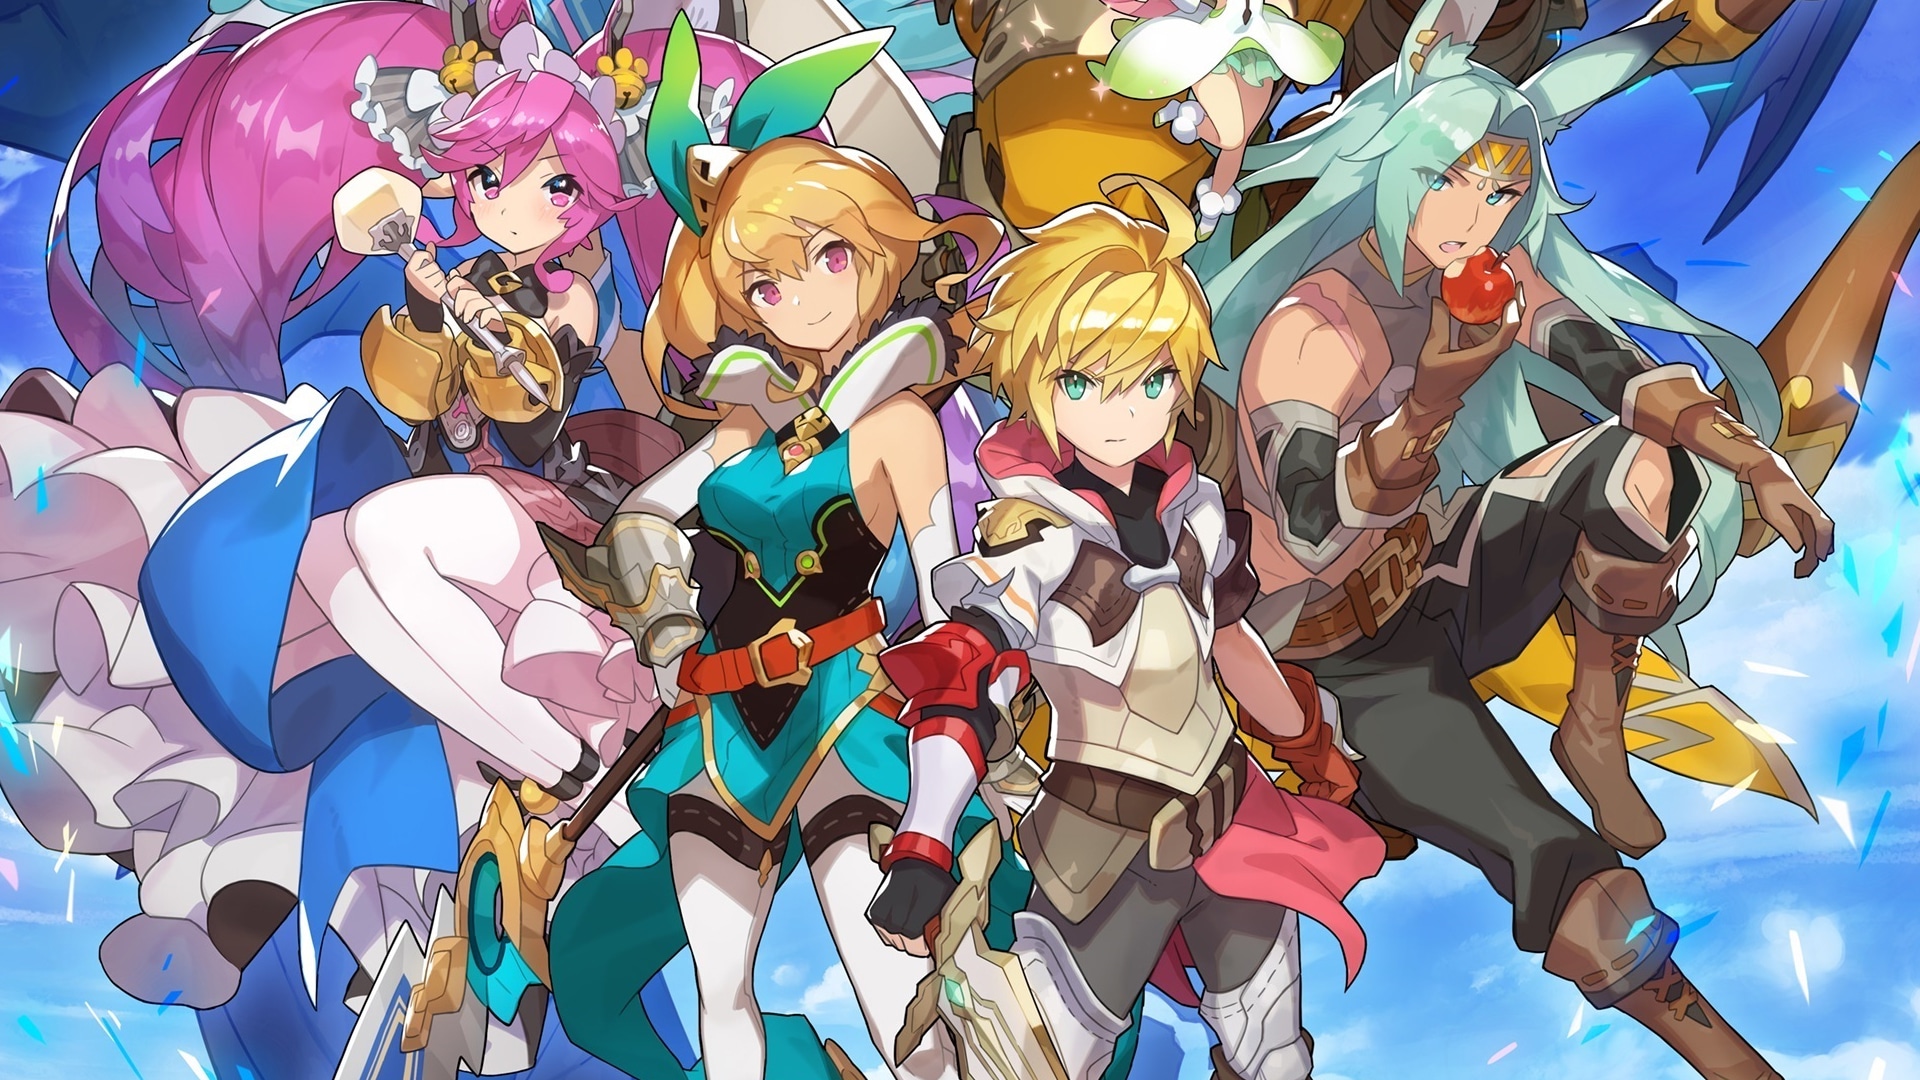 Dragalia Lost Ends Service After 4 Years